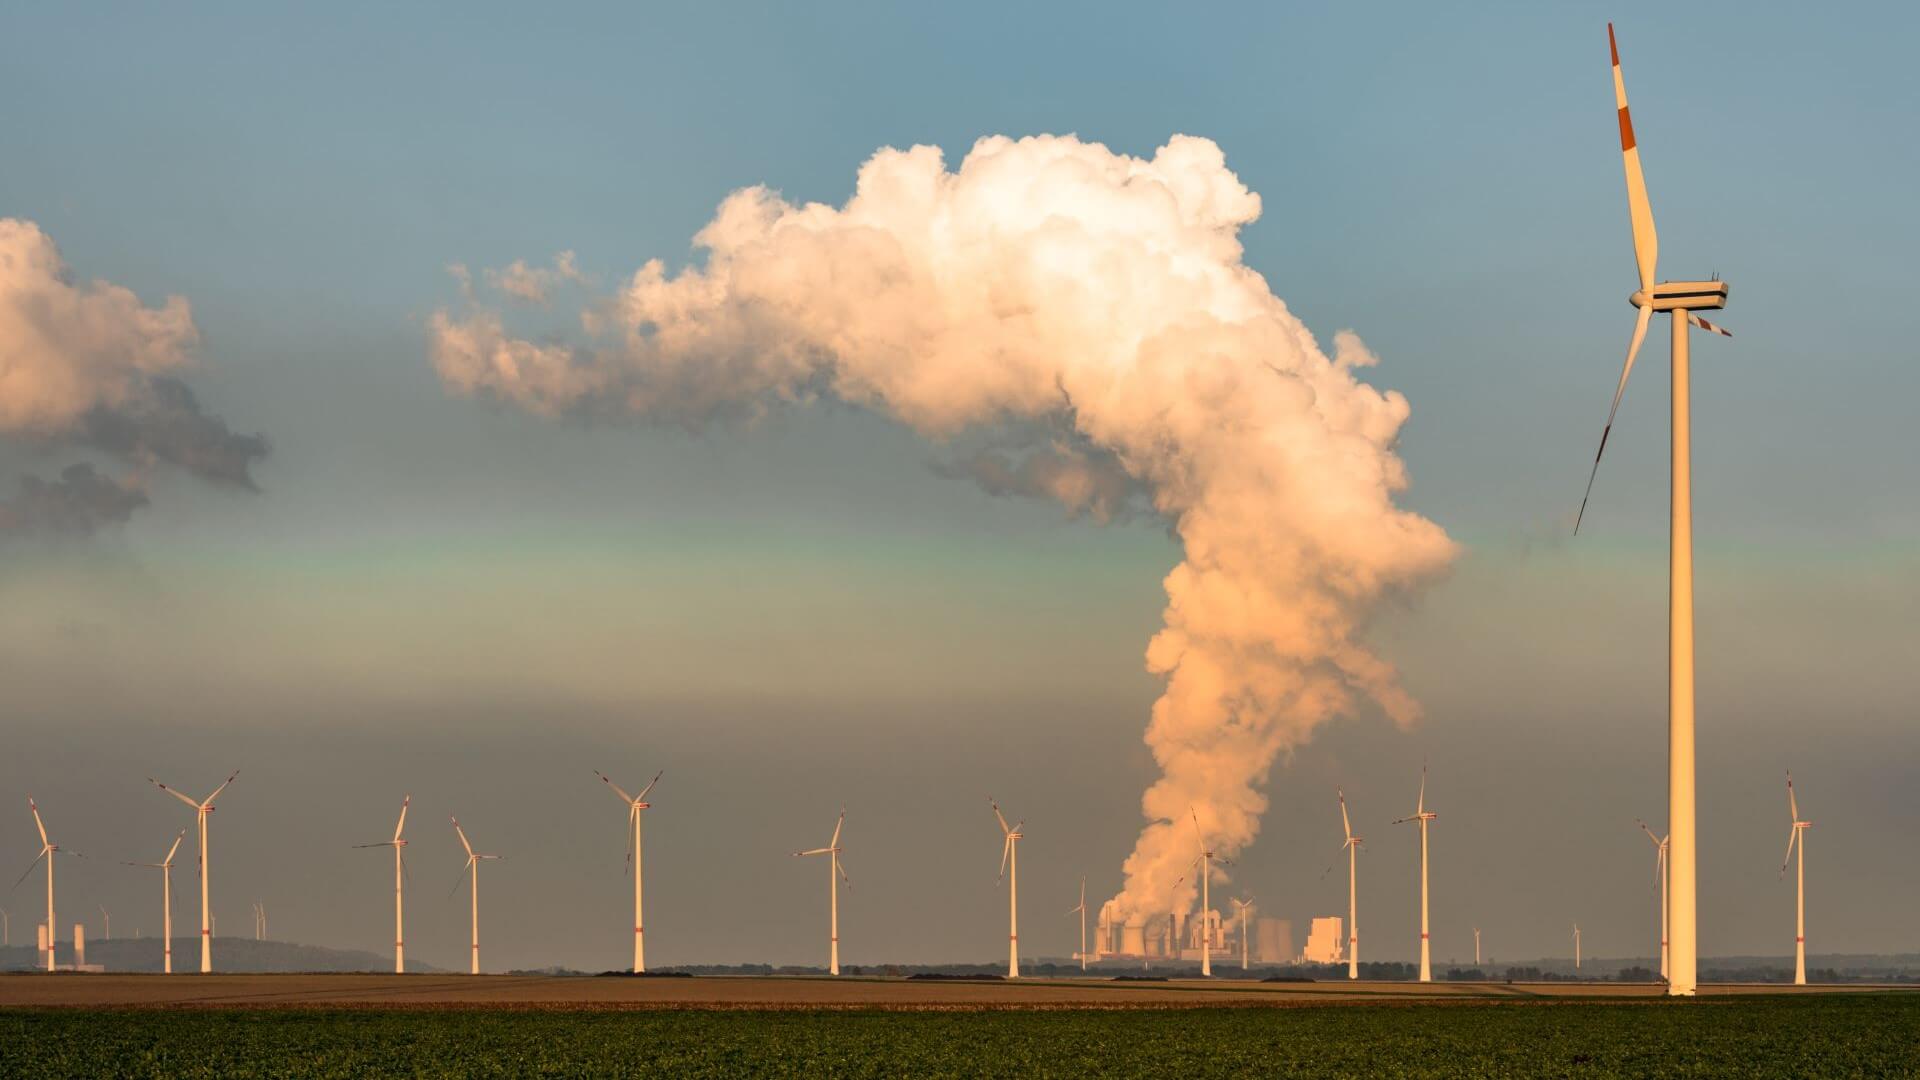 Group of wind turbines in front of coal-fired power station emitting clouds of smoke